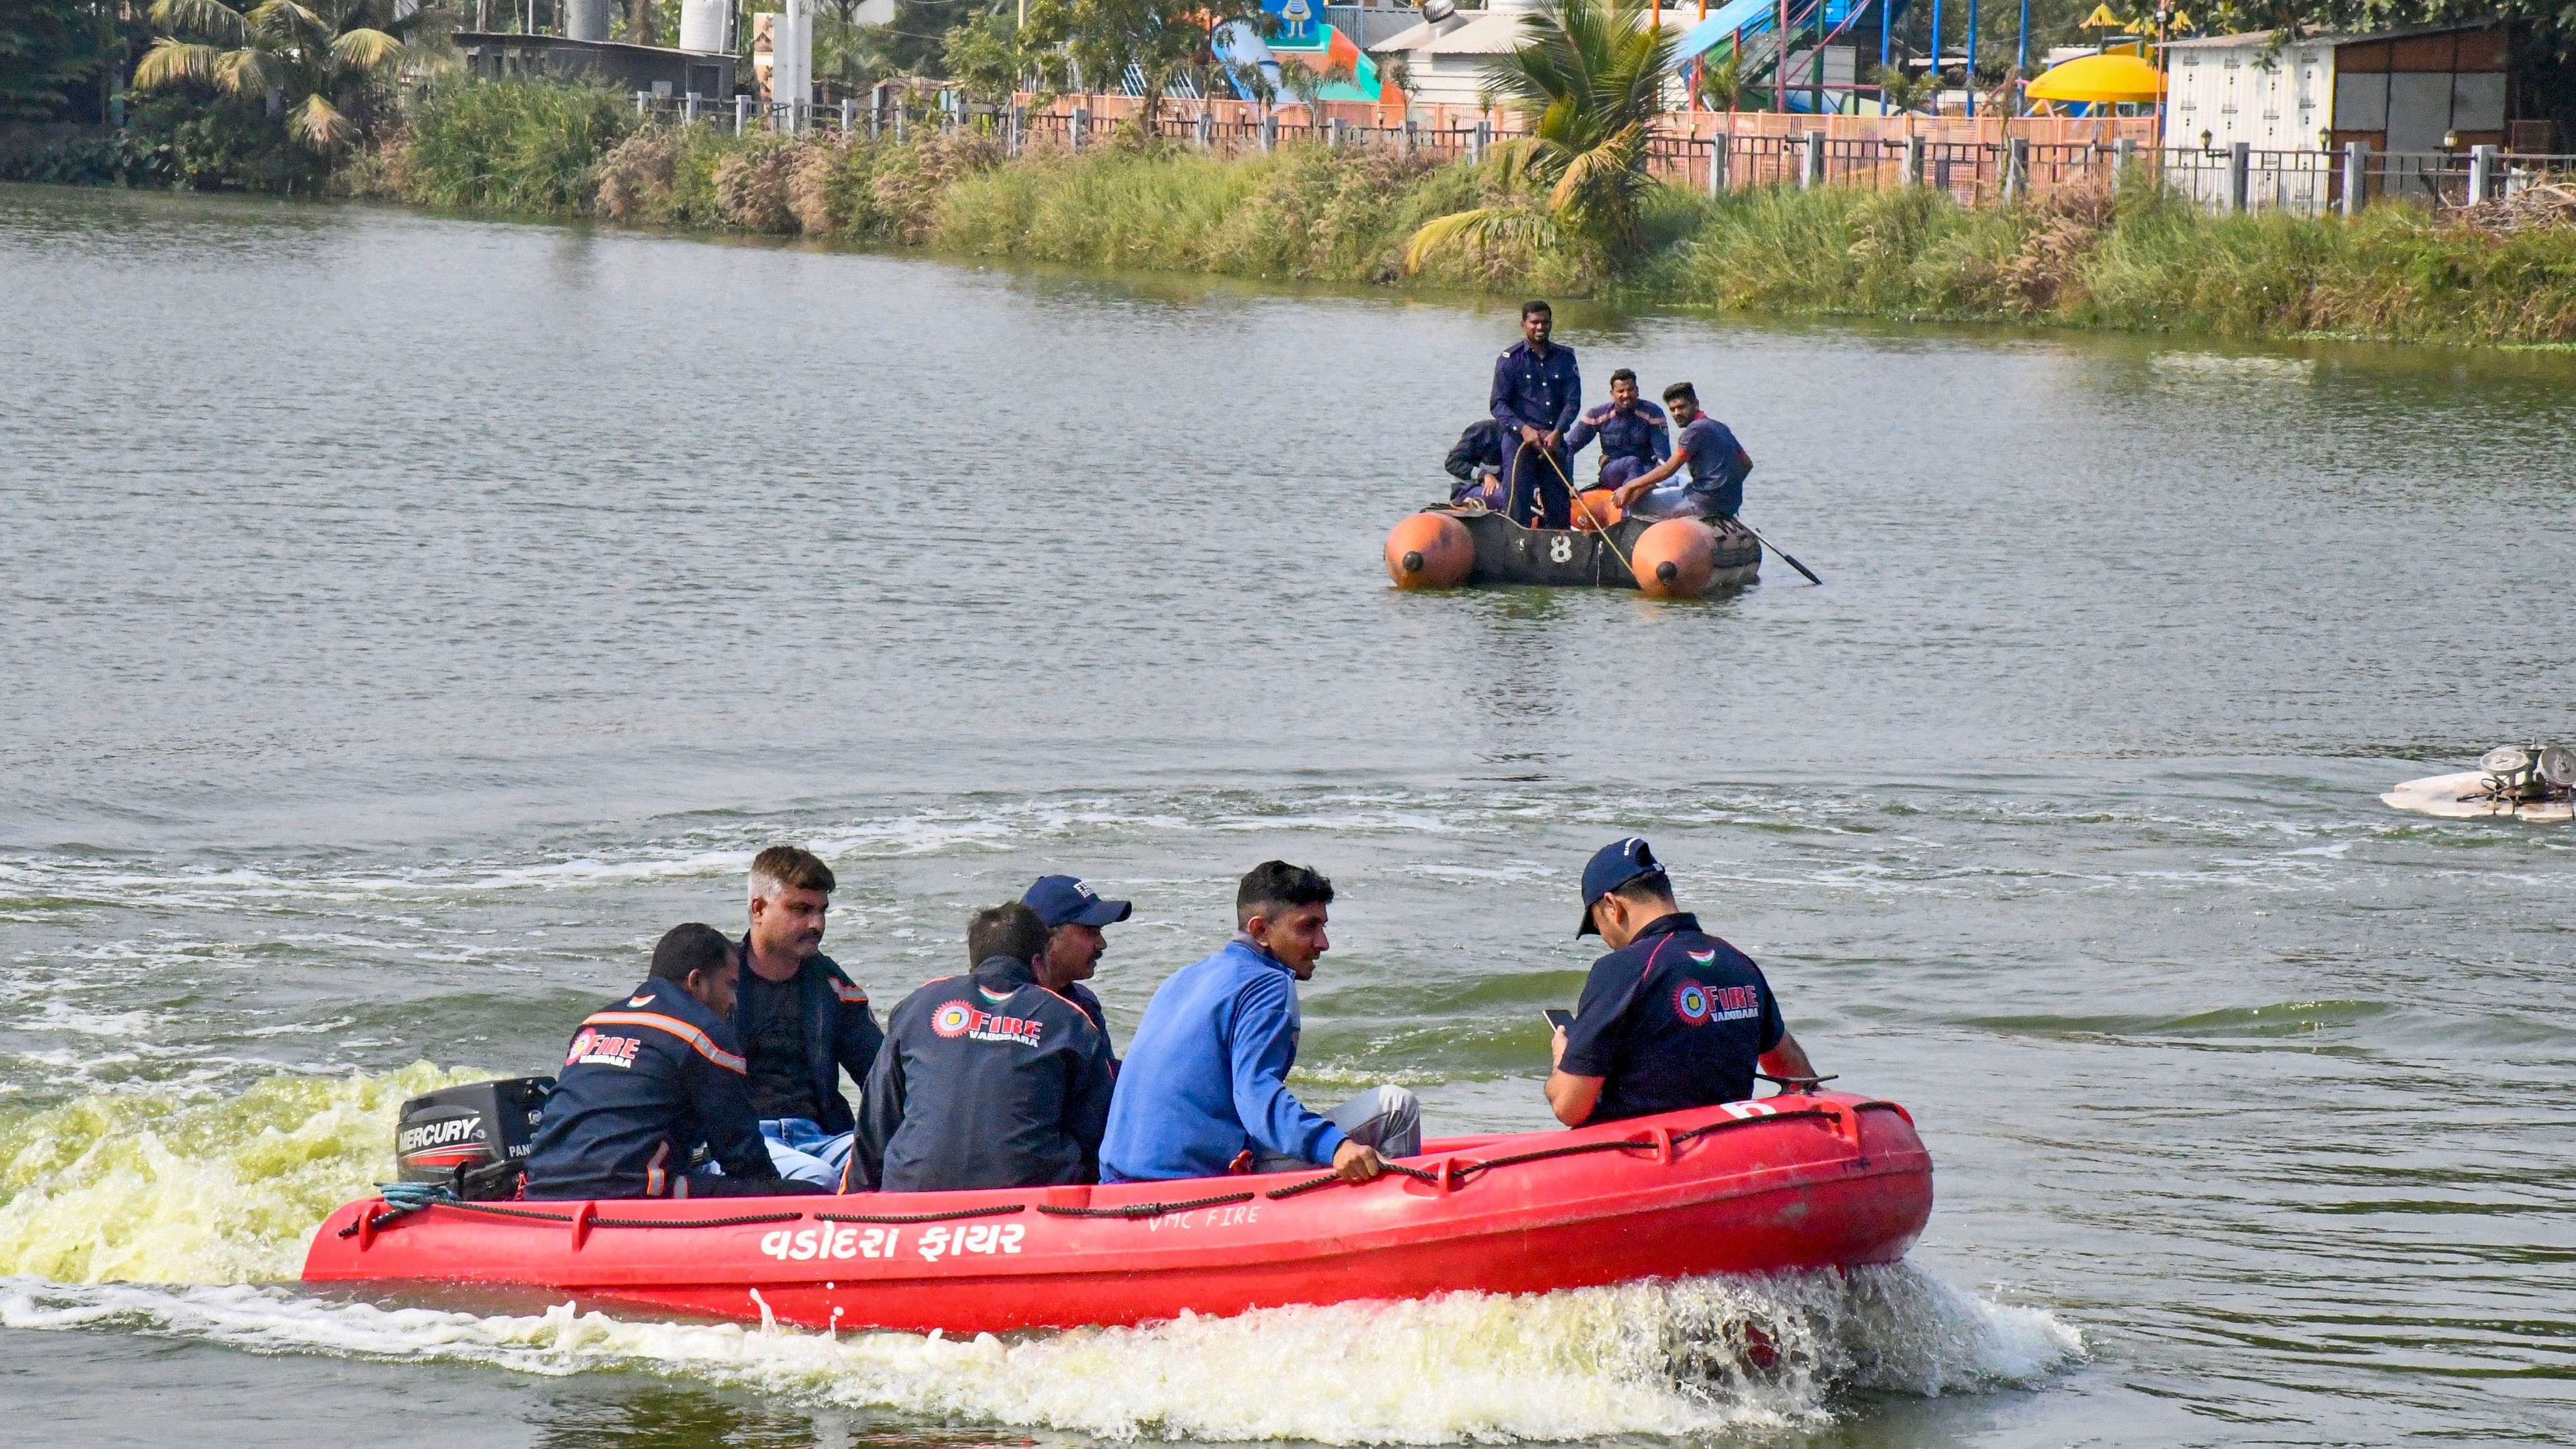 <div class="paragraphs"><p> Gujarat Forensic Science Laboratory (FSL) team inspects the site where a boat carrying school students capsized in a lake, in Vadodara.</p></div>